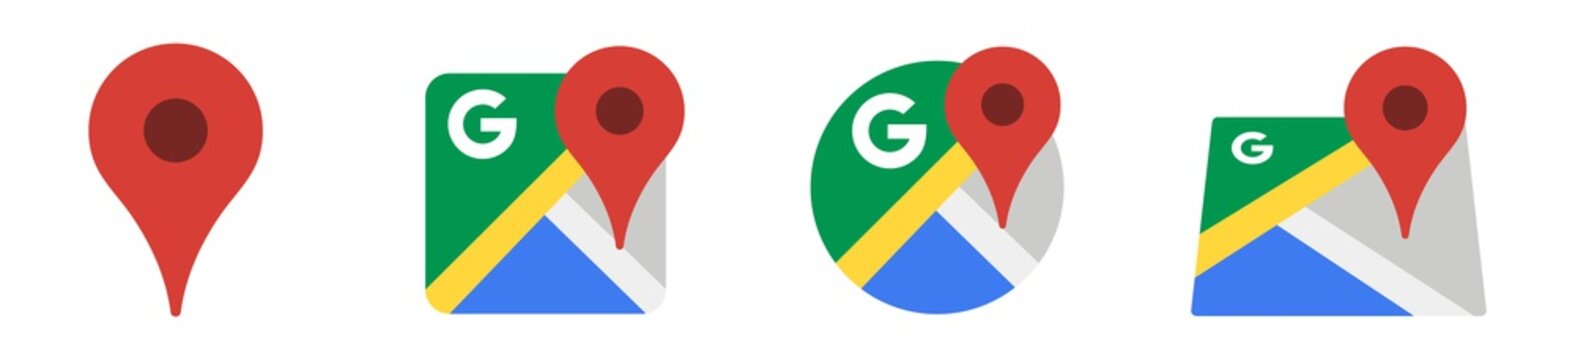 Google Maps icon set,  Map pin markers, Location icon symbol, Global Positioning system sign, vector illustration 